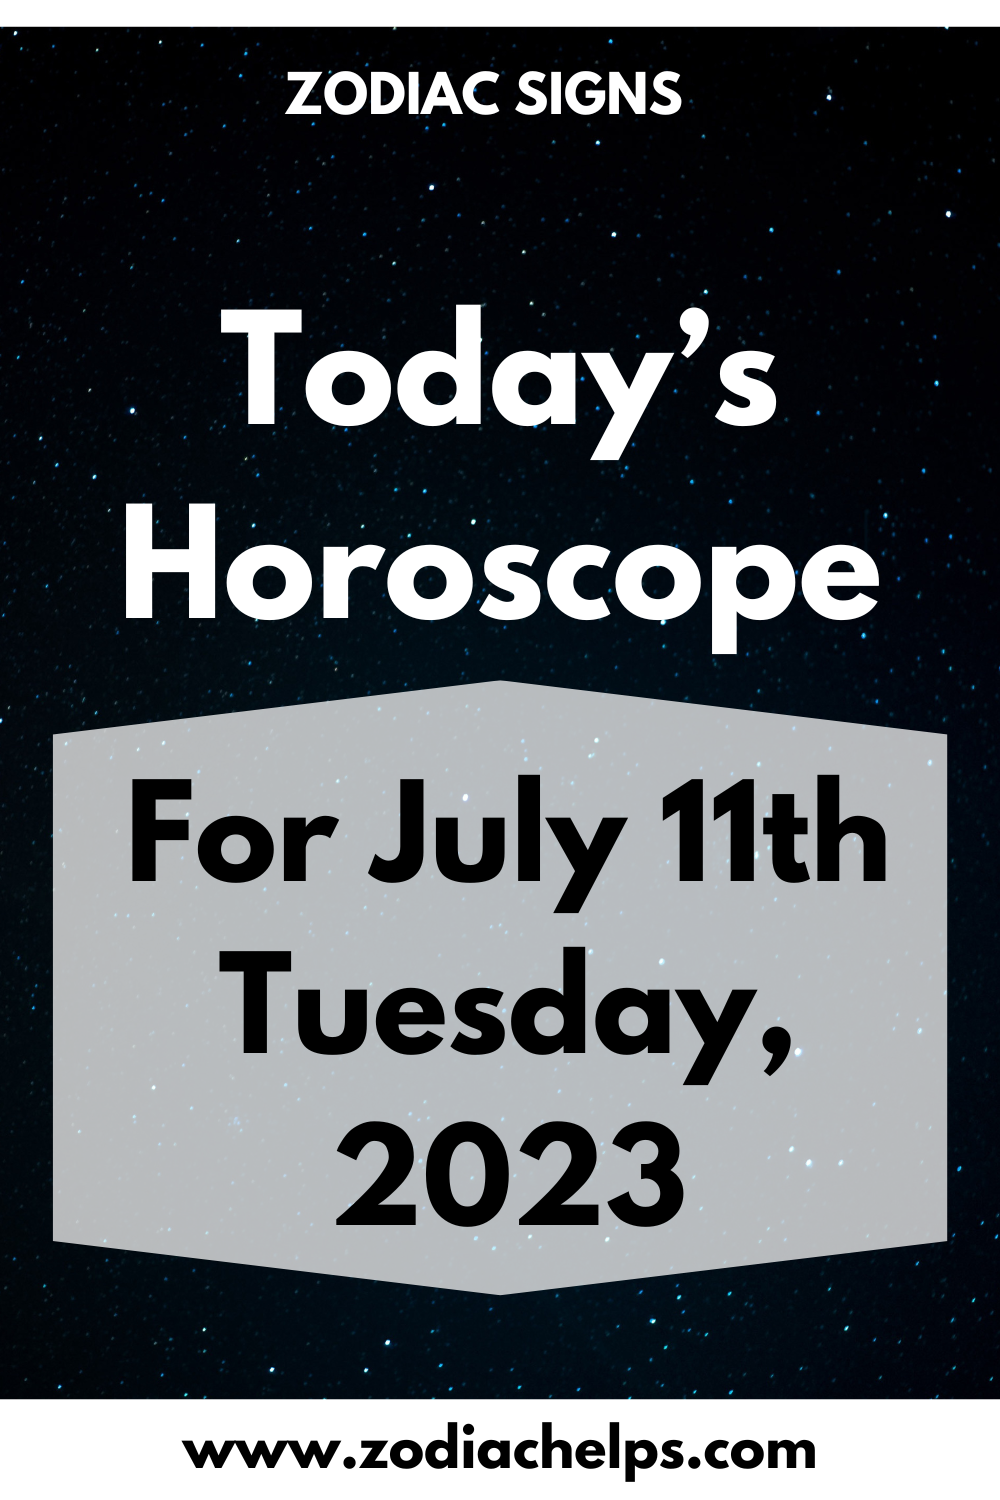 Today’s Horoscope for July 11th Tuesday, 2023